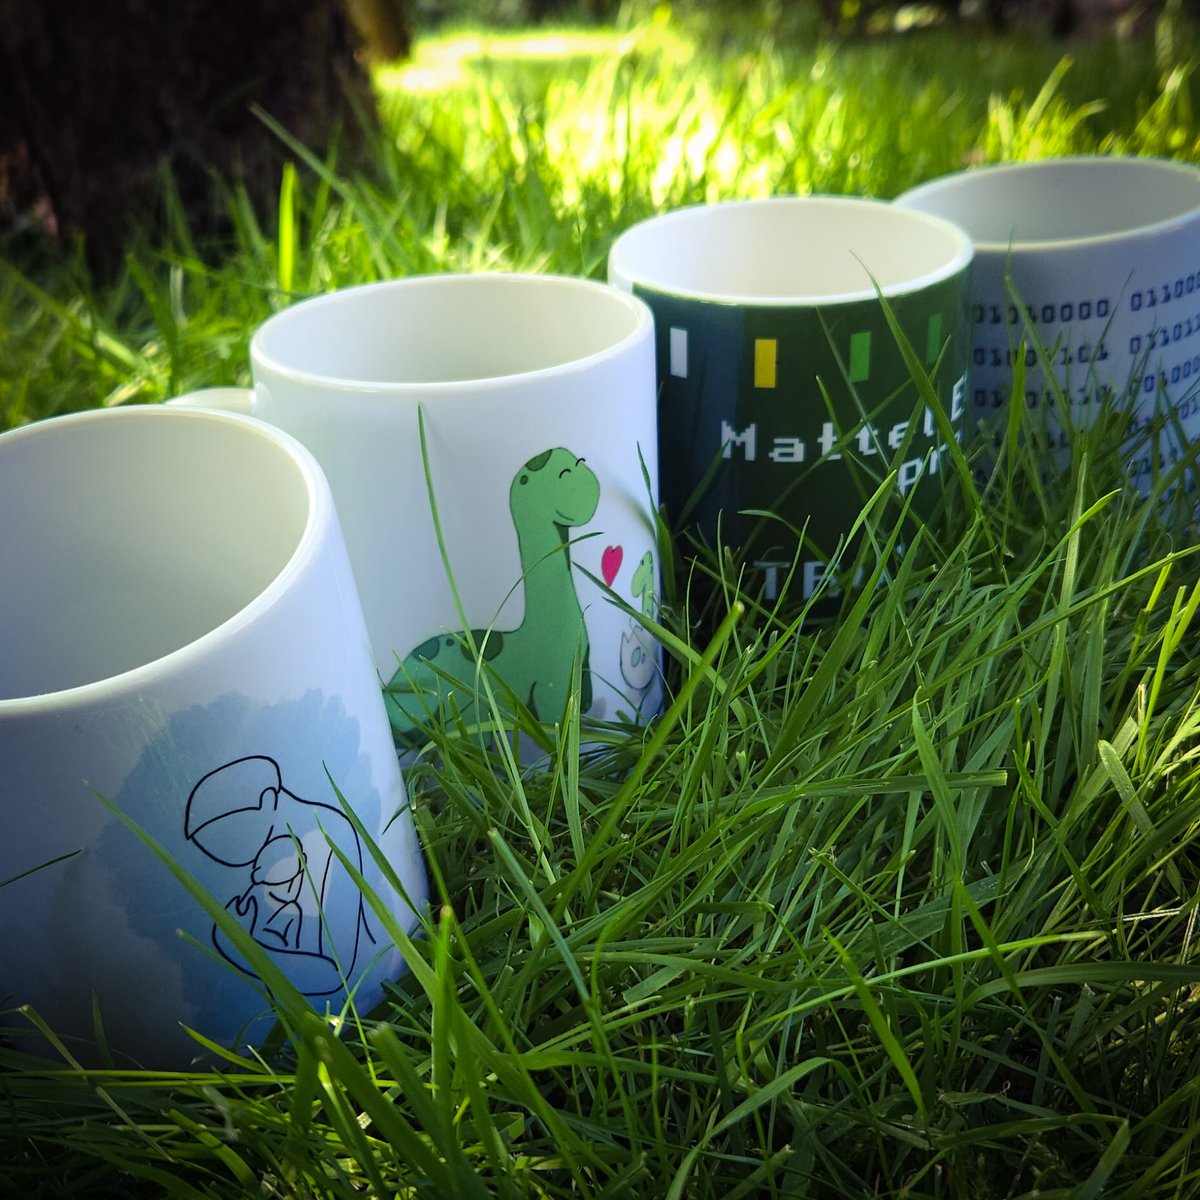 ☕️Make sure Dad is fuelled for the day☕️

Shop a range of mugs, coasters and bookmarks that make great gifts for Father's Day.

#fathersdaygifts #fathersday #shopsmall #shoplocal #giftsforgrandparents #giftsfordad #giftsforcoffeelovers #PandaMotion #mumlife #mumbosslife